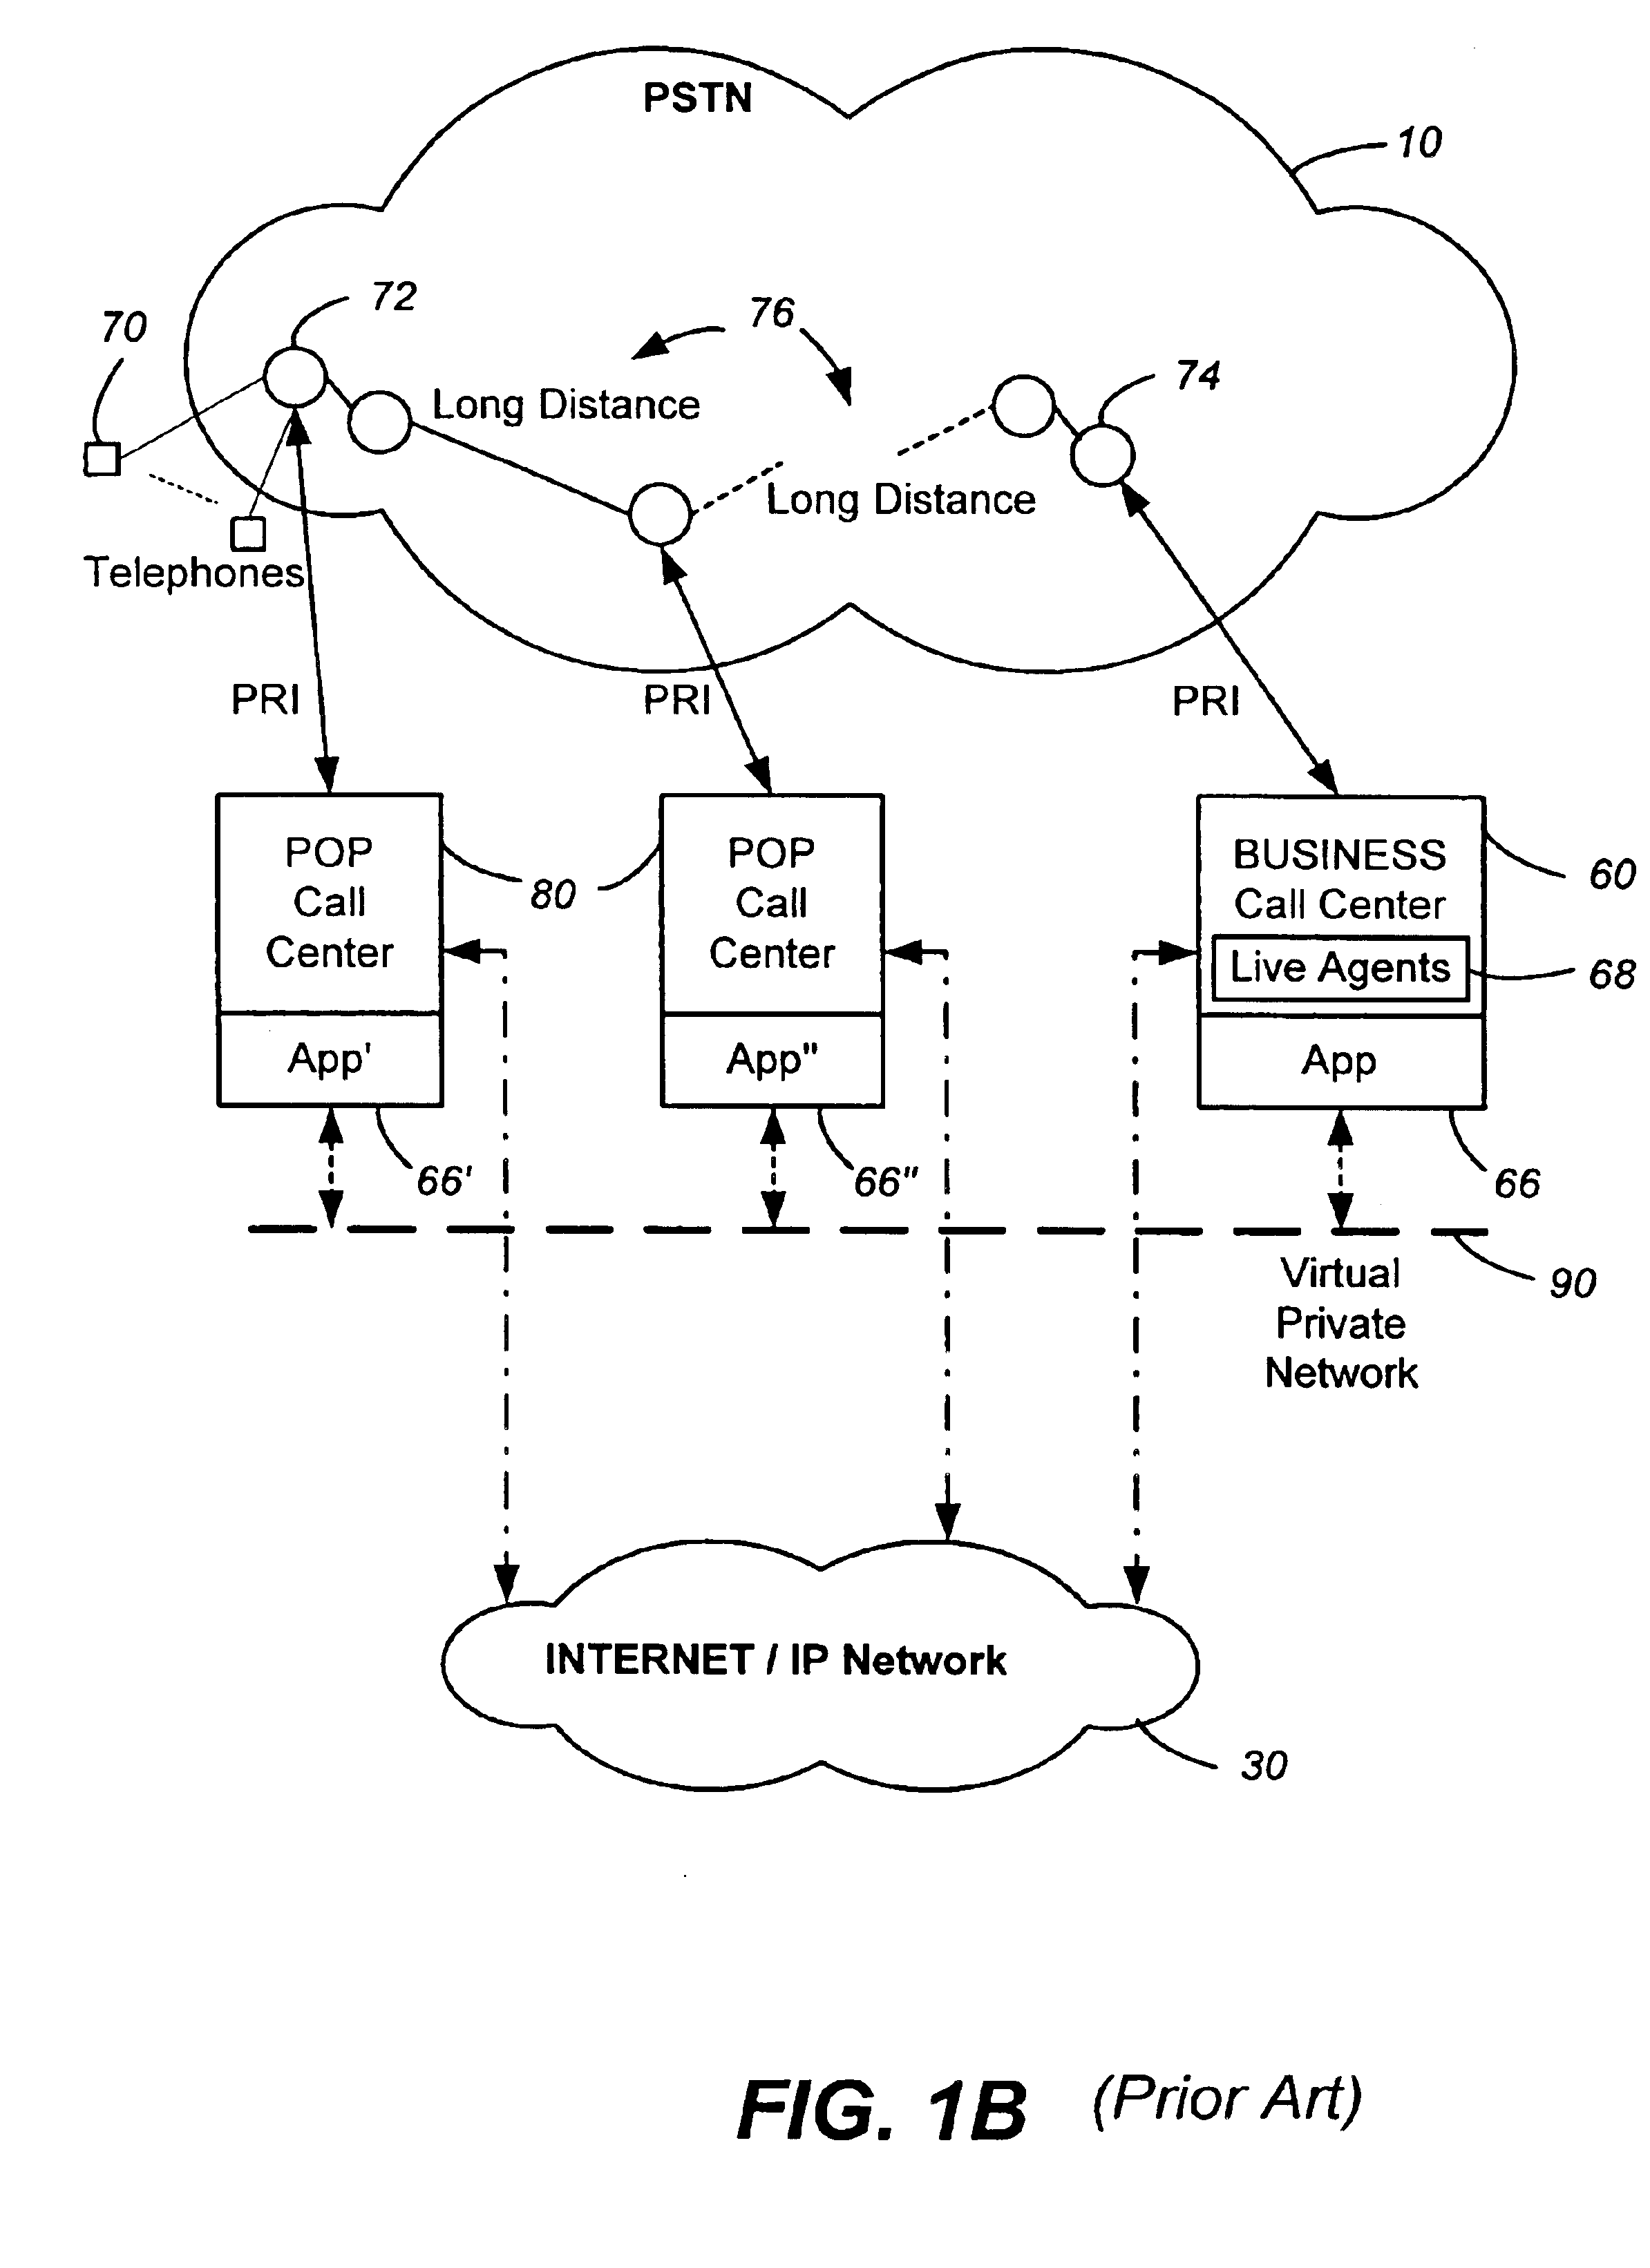 Networked computer telephony system driven by web-based applications